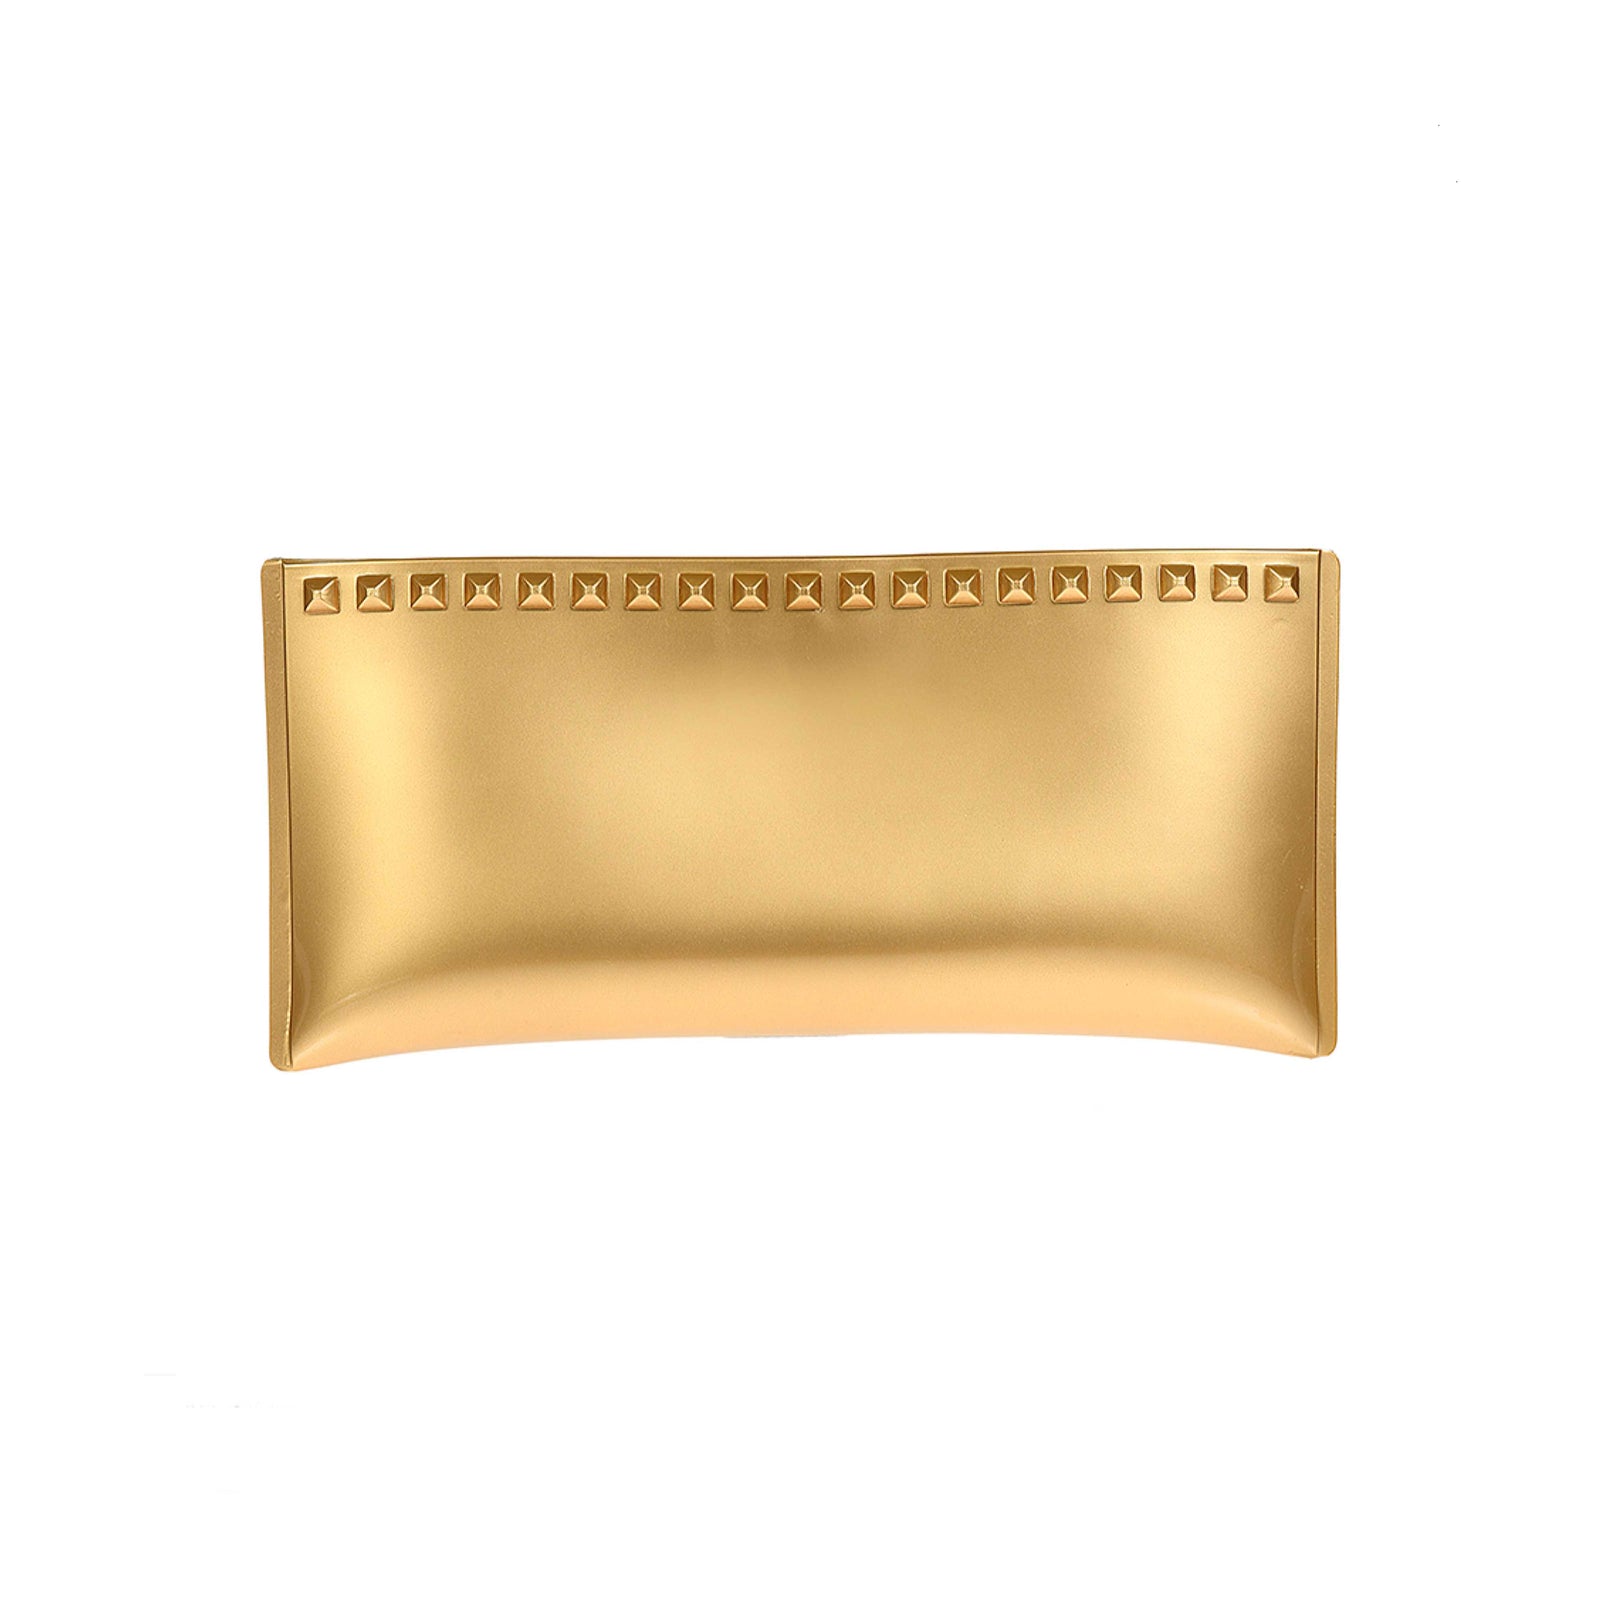 Gold Julian jelly purse from Carmen Sol perfect for any outfit